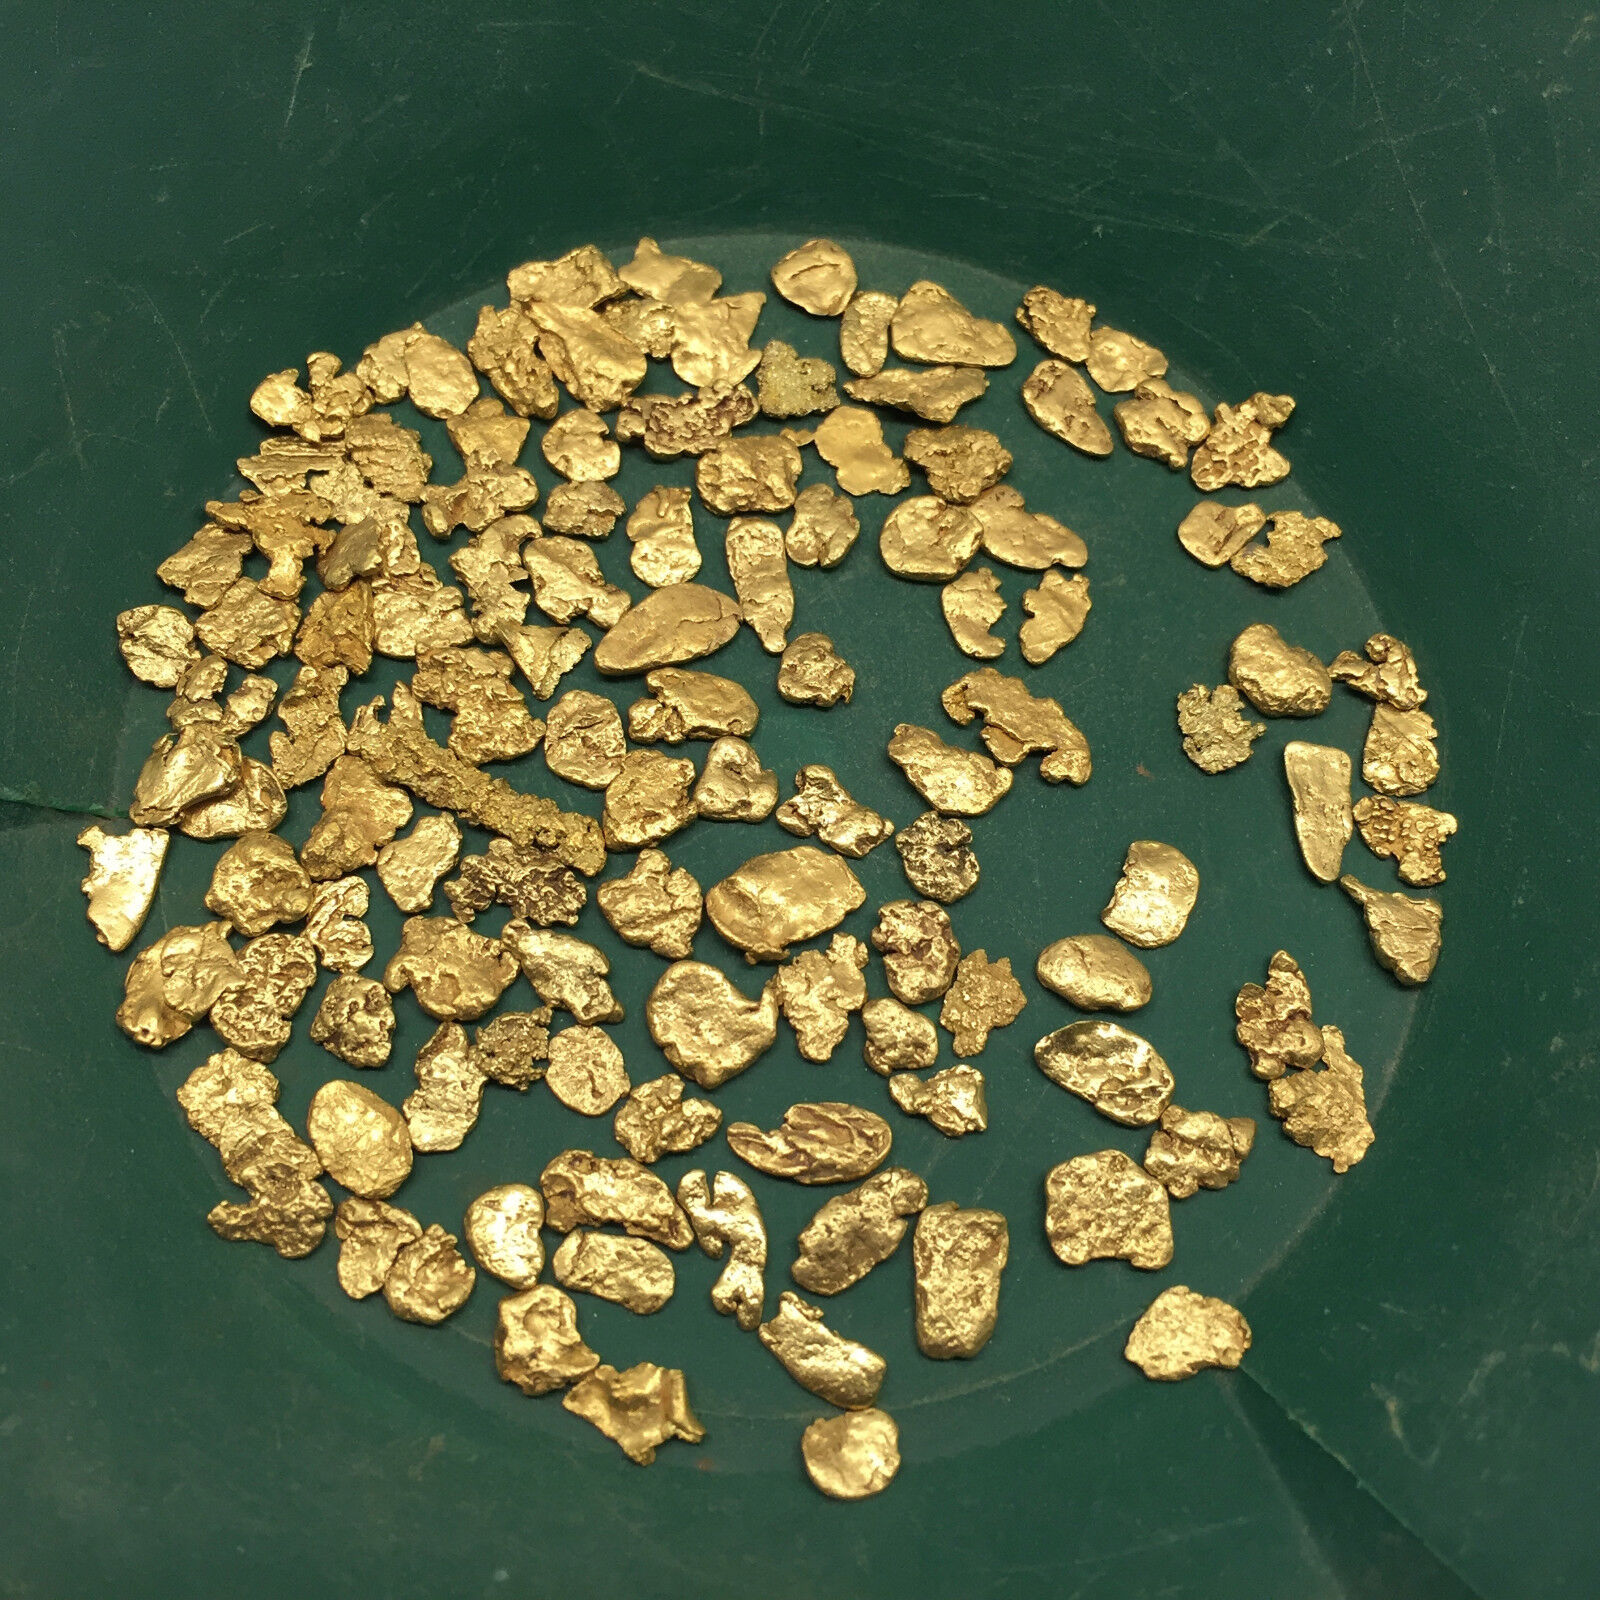 10 pound NUGGET RESERVE ELITE Gold Panning Paydirt - Guaranteed Unsearched